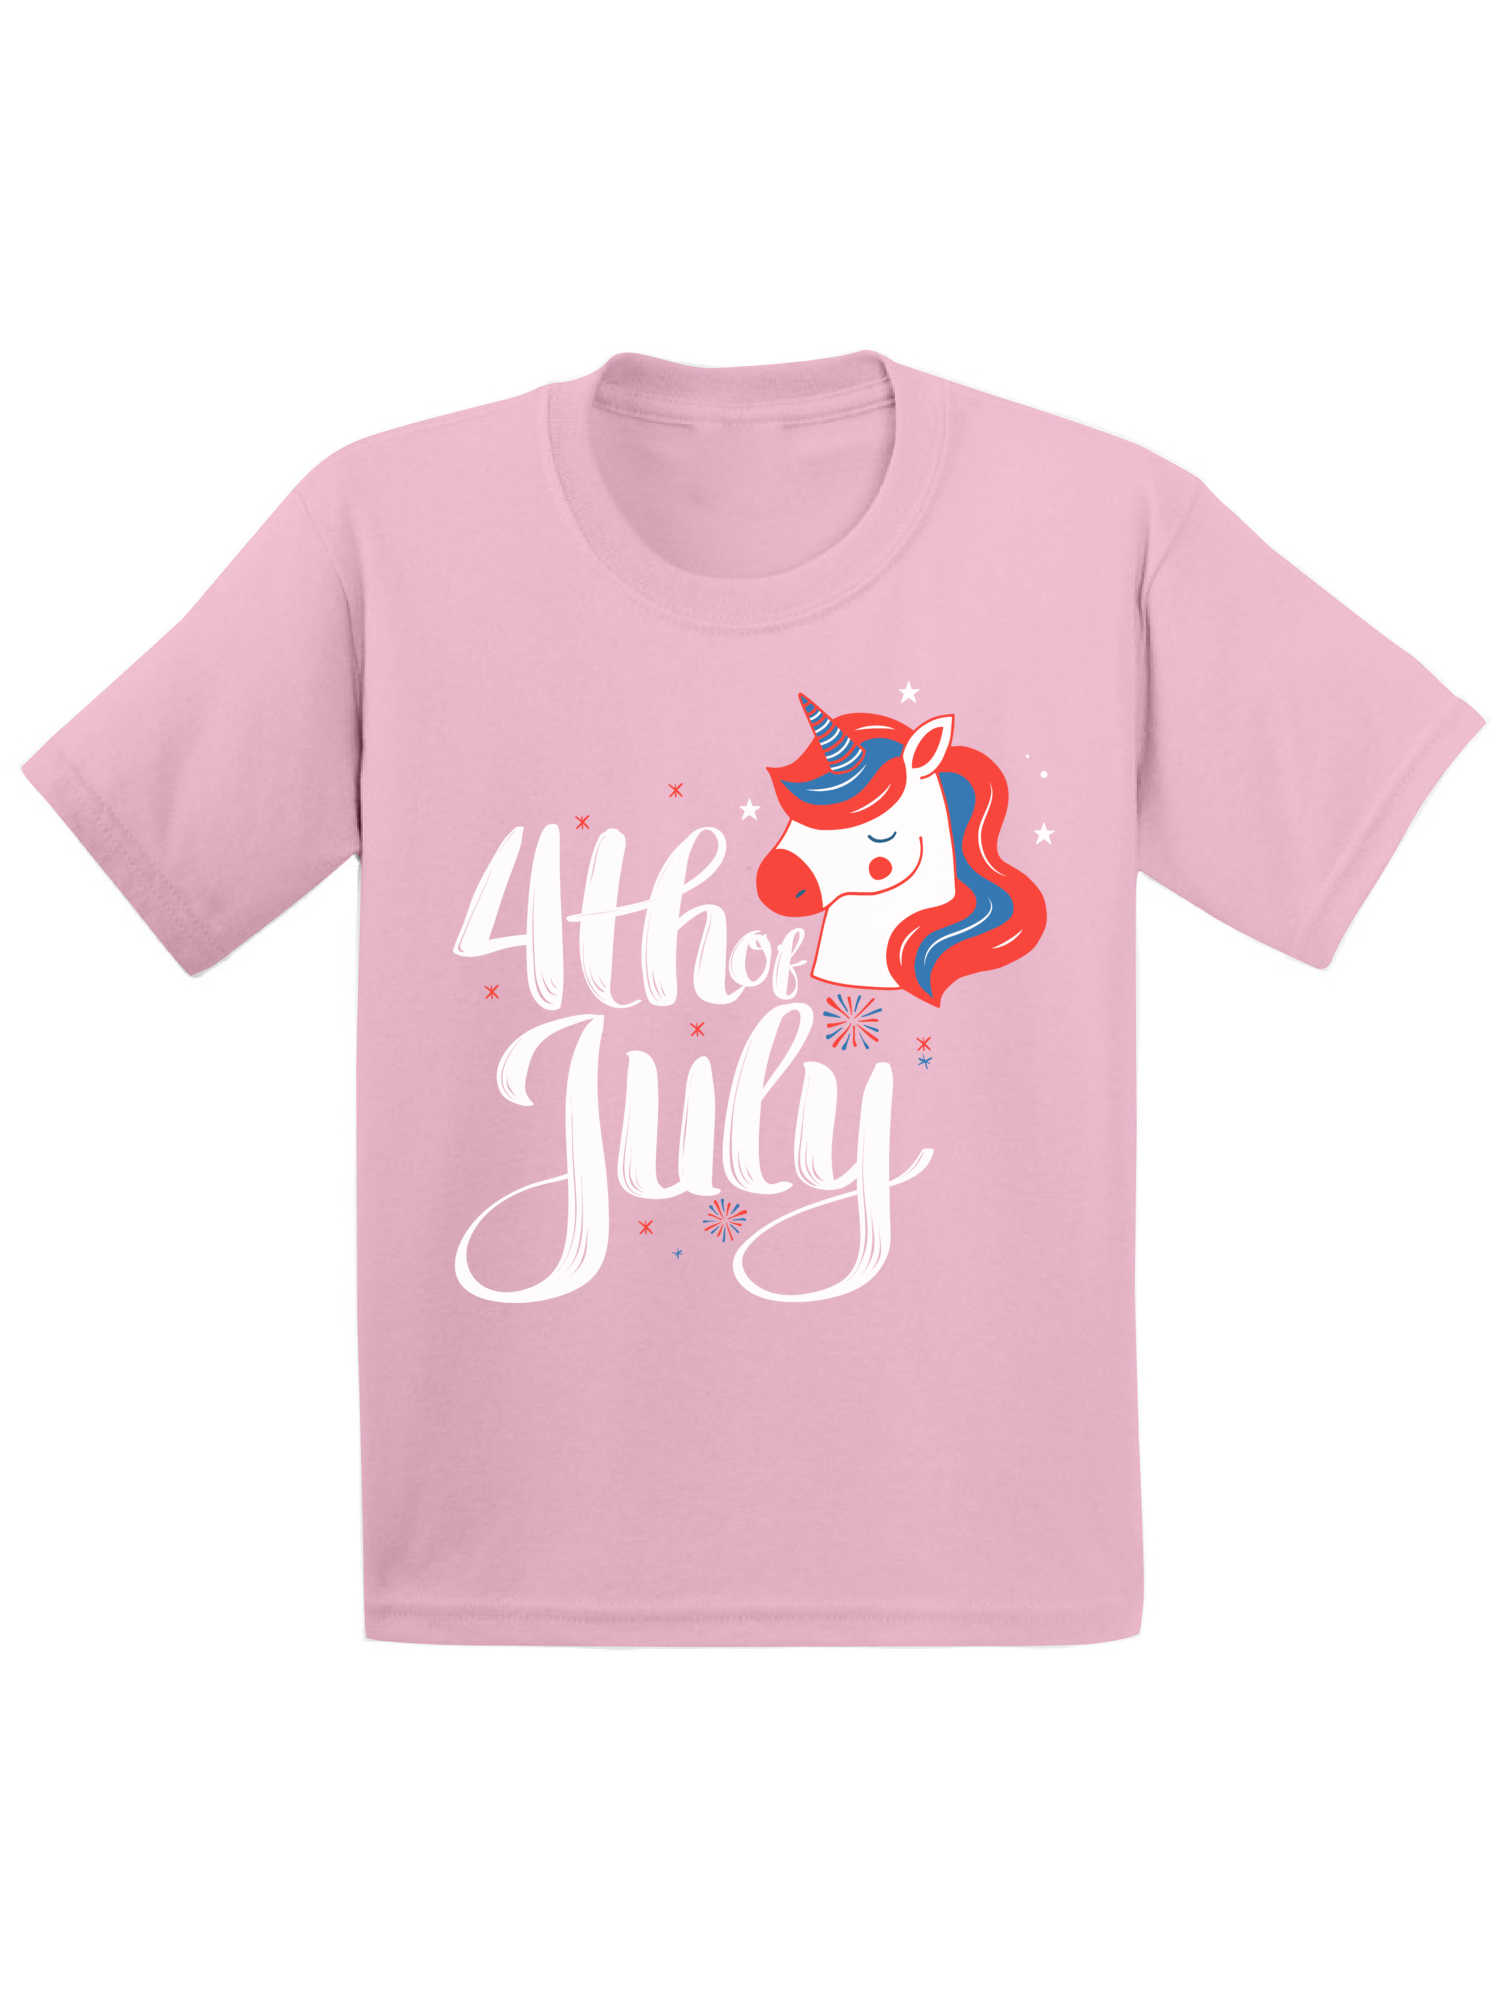 Awkward Styles Outfit for Children Unicorn T-Shirt Unicorn Lovers Tshirt Toddler T Shirt 4th of July T-Shirt Cute Unicorn Shirt Girls Clothes Boys T Shirt Outfit for Kids Patriotic Gifts USA Holiday - image 1 of 4